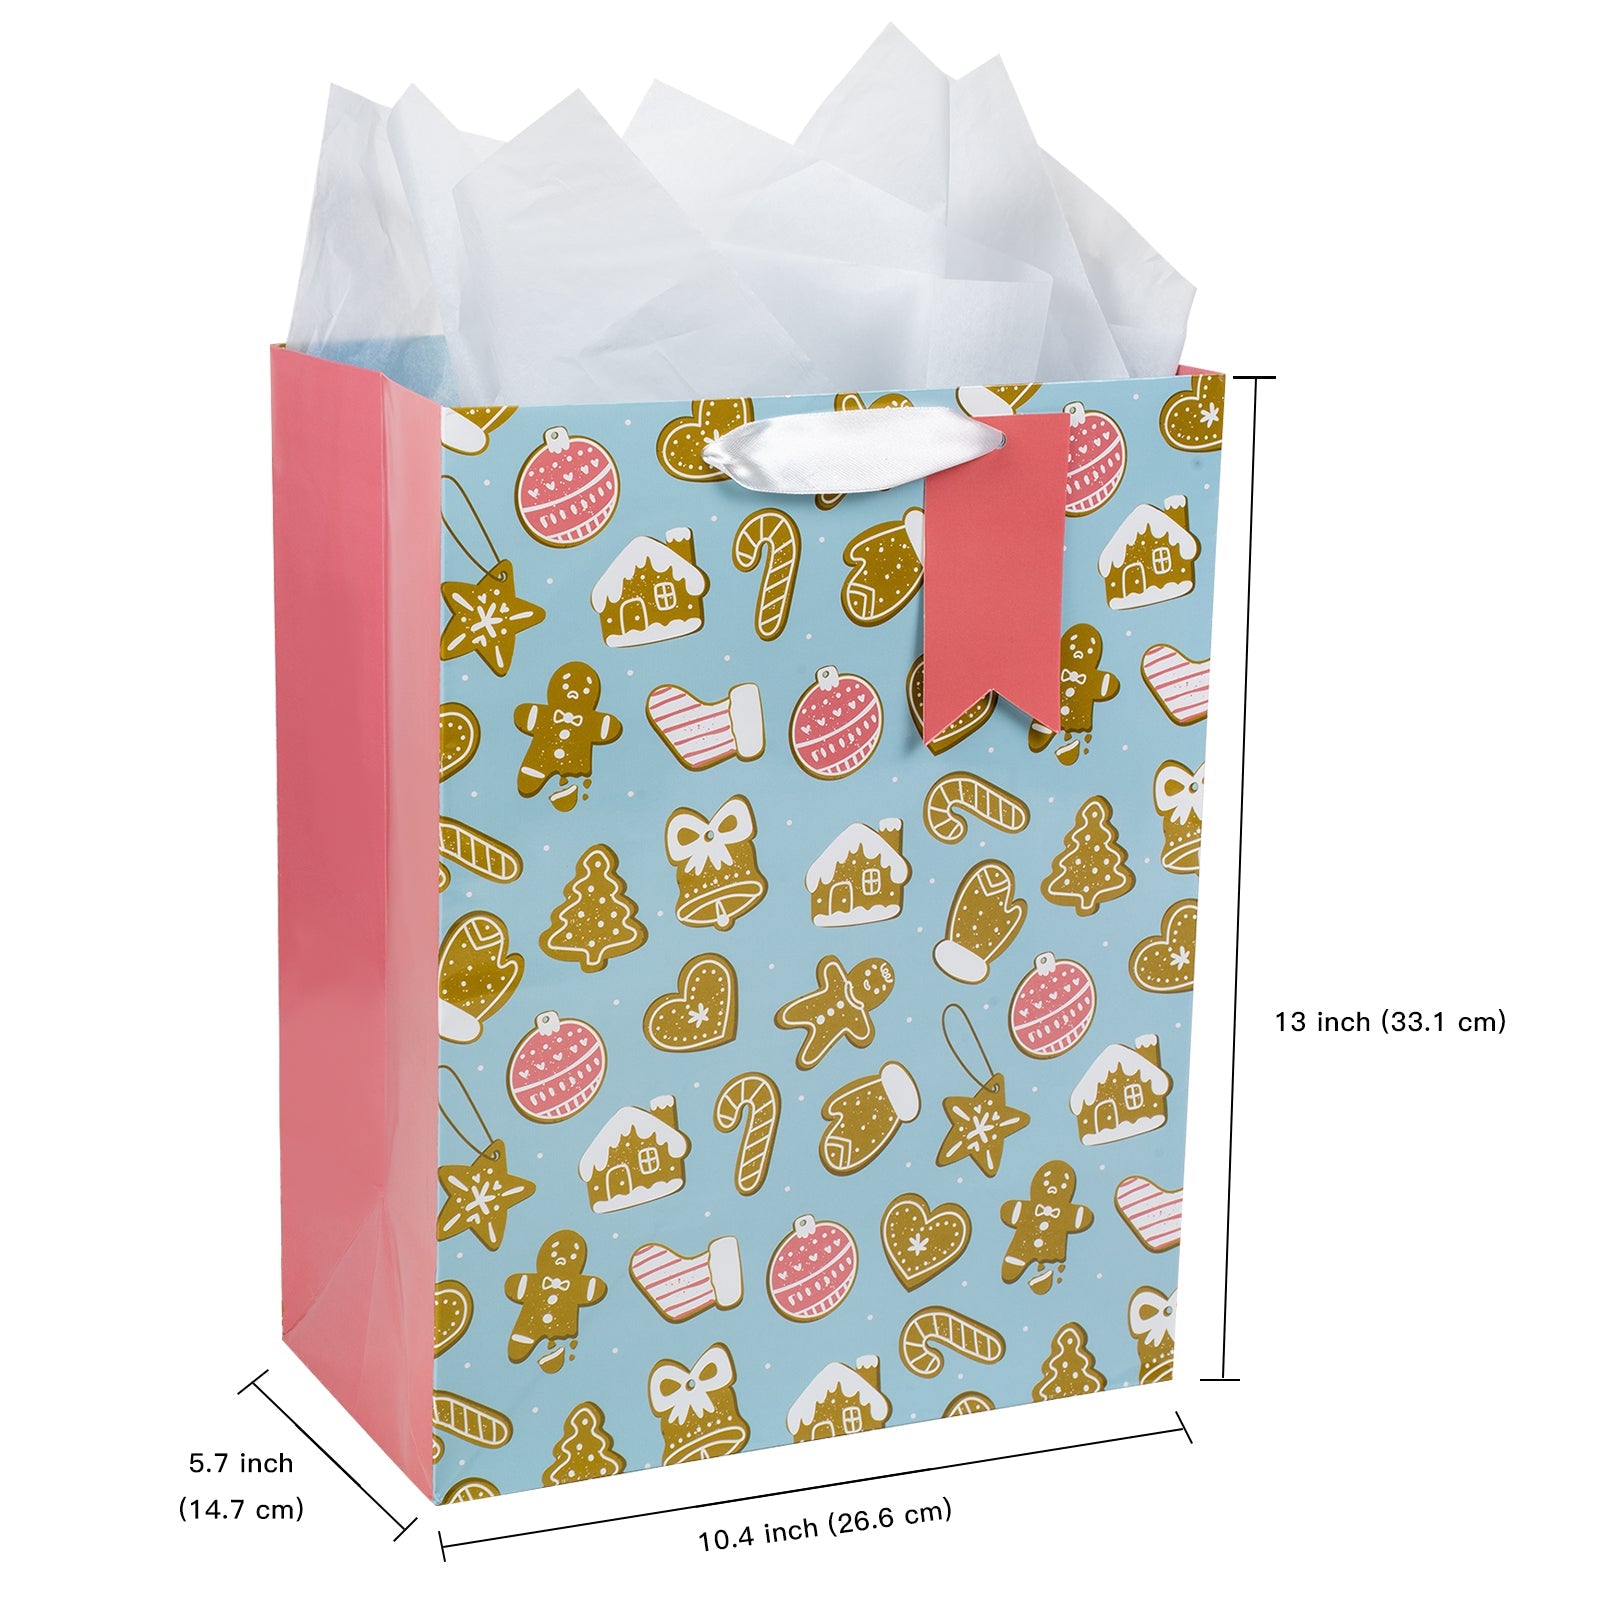 Assort Large Christmas Gift Bag Pink 9 Pack 10"x5"x13"